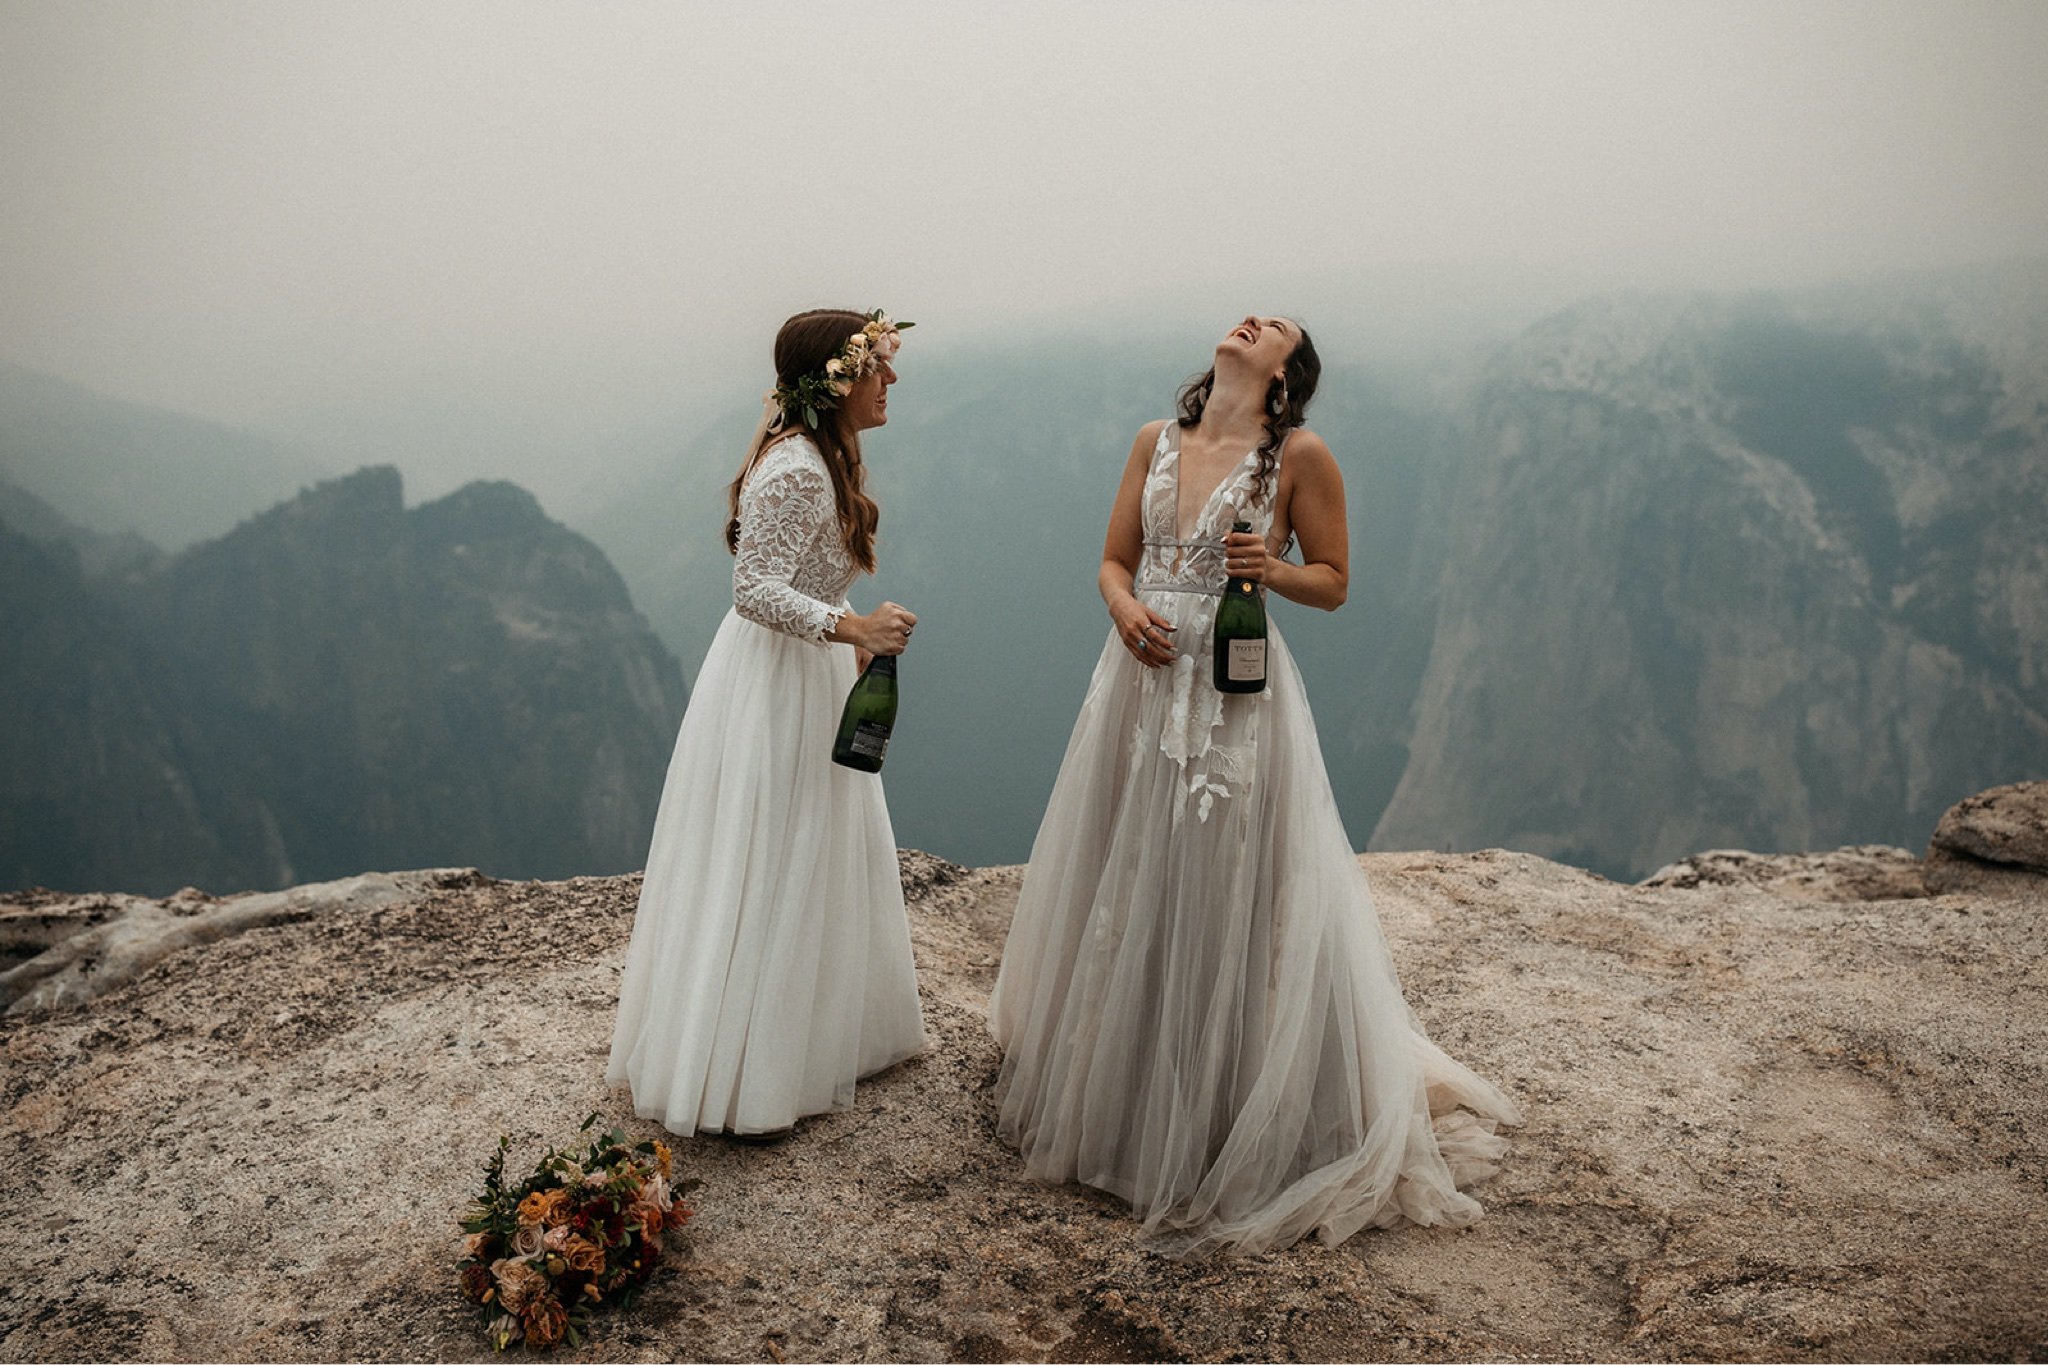 Yosemite National Park Elopement with Two Brides-Will Khoury47.jpg